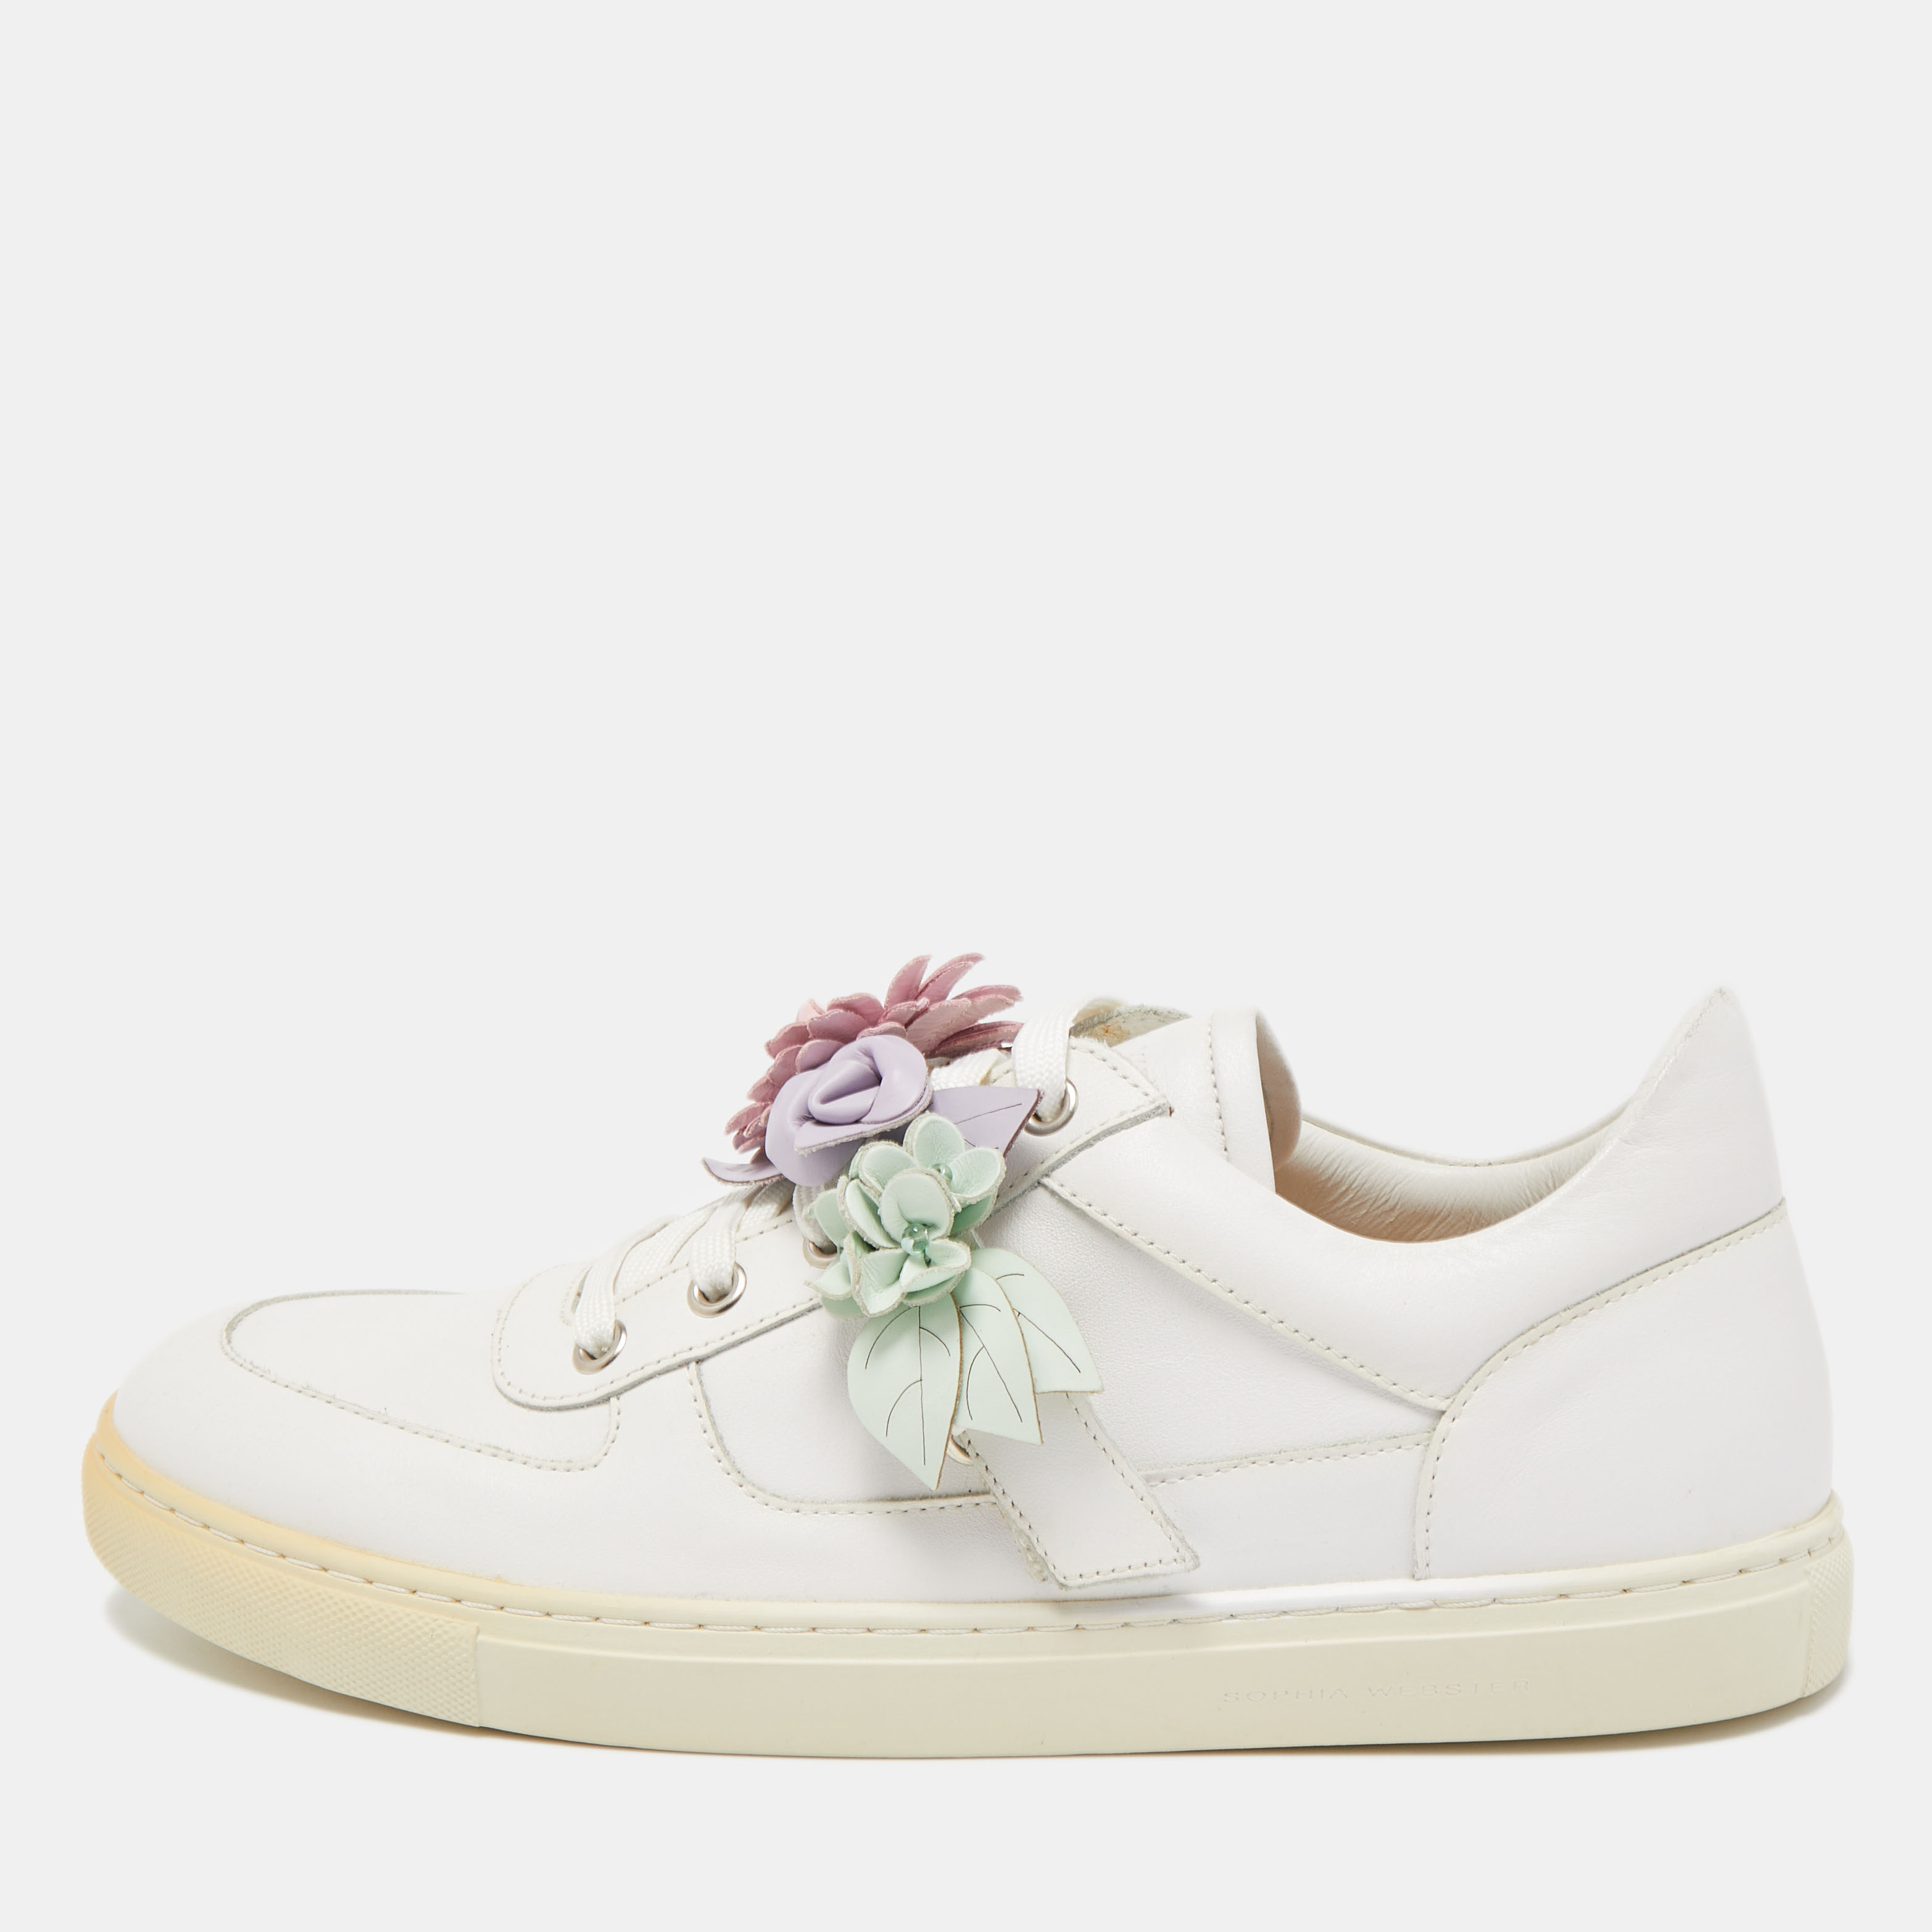 Sophia Webster White Leather Lilico Floral Sneakers Size 42